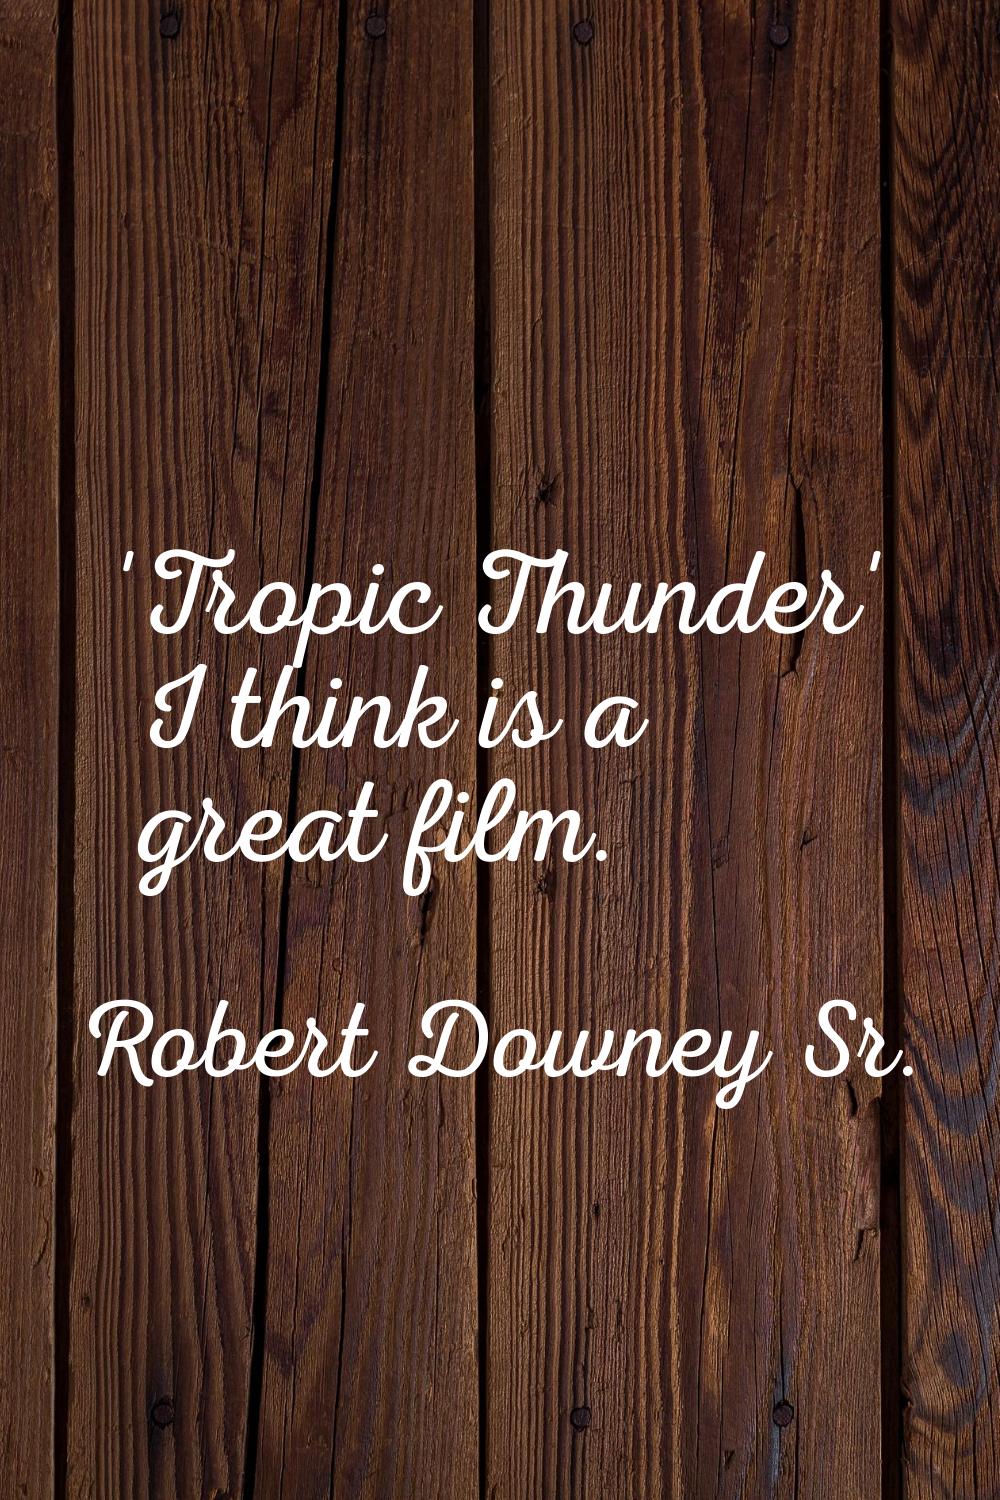 'Tropic Thunder' I think is a great film.